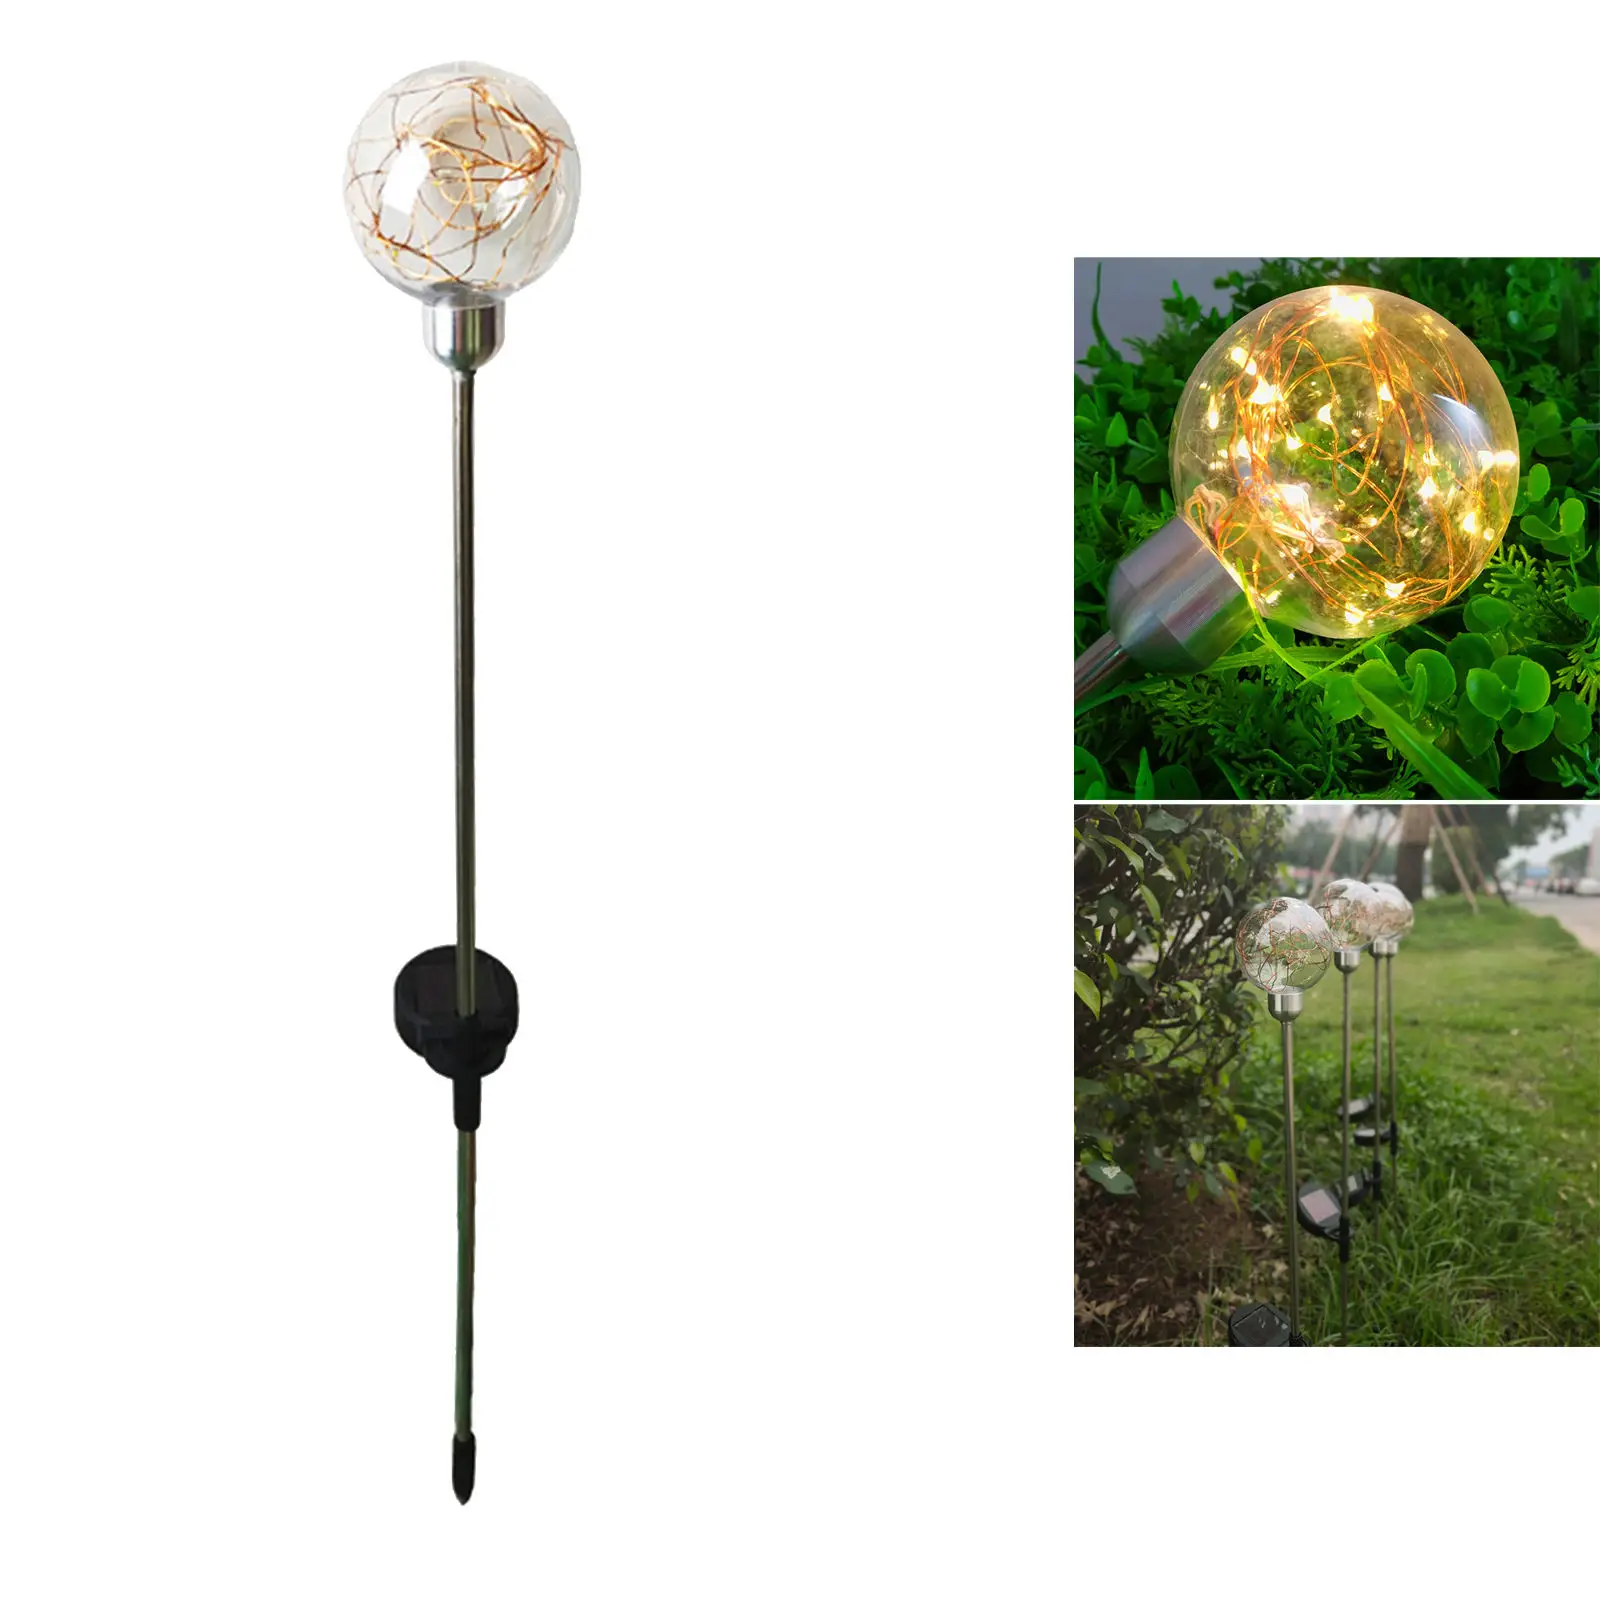 Garden Solar Pathway Light Waterproof Path Yard Patio Ground Stainless Steel Ball Shape Led Lights for Wedding Party Decorative